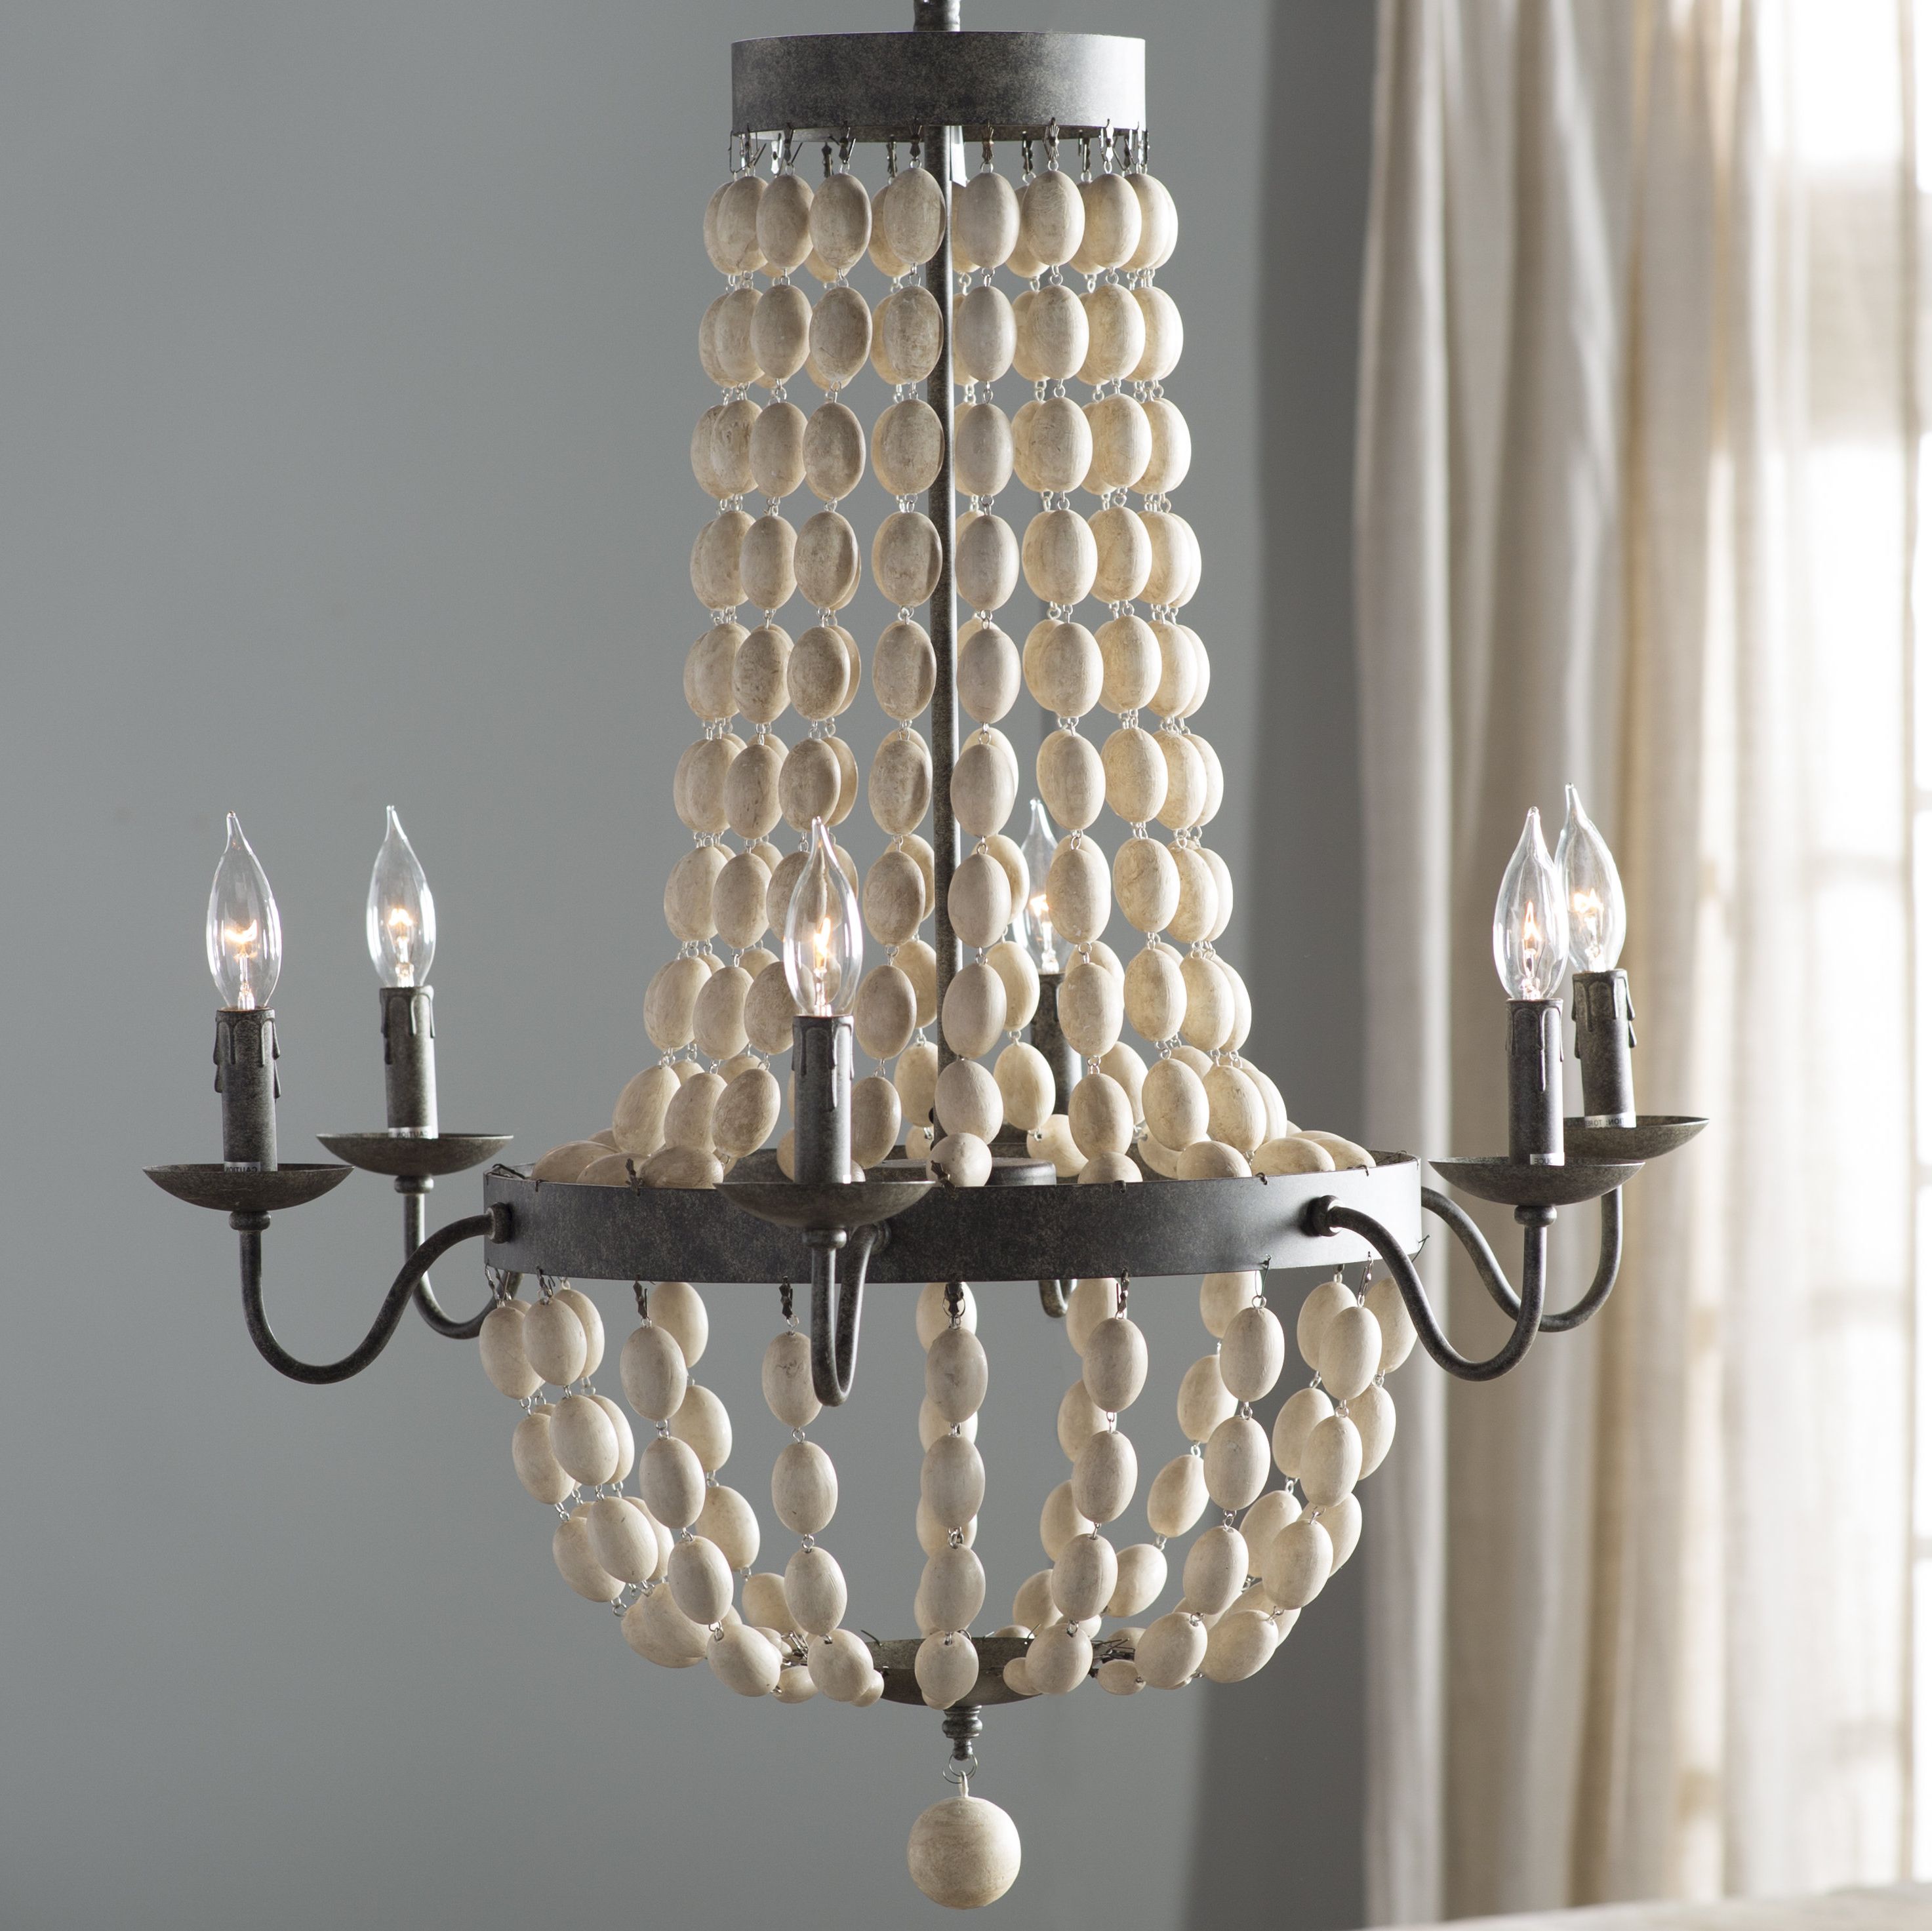 2019 Bargas 6 Light Empire Chandelier With Duron 5 Light Empire Chandeliers (View 4 of 25)